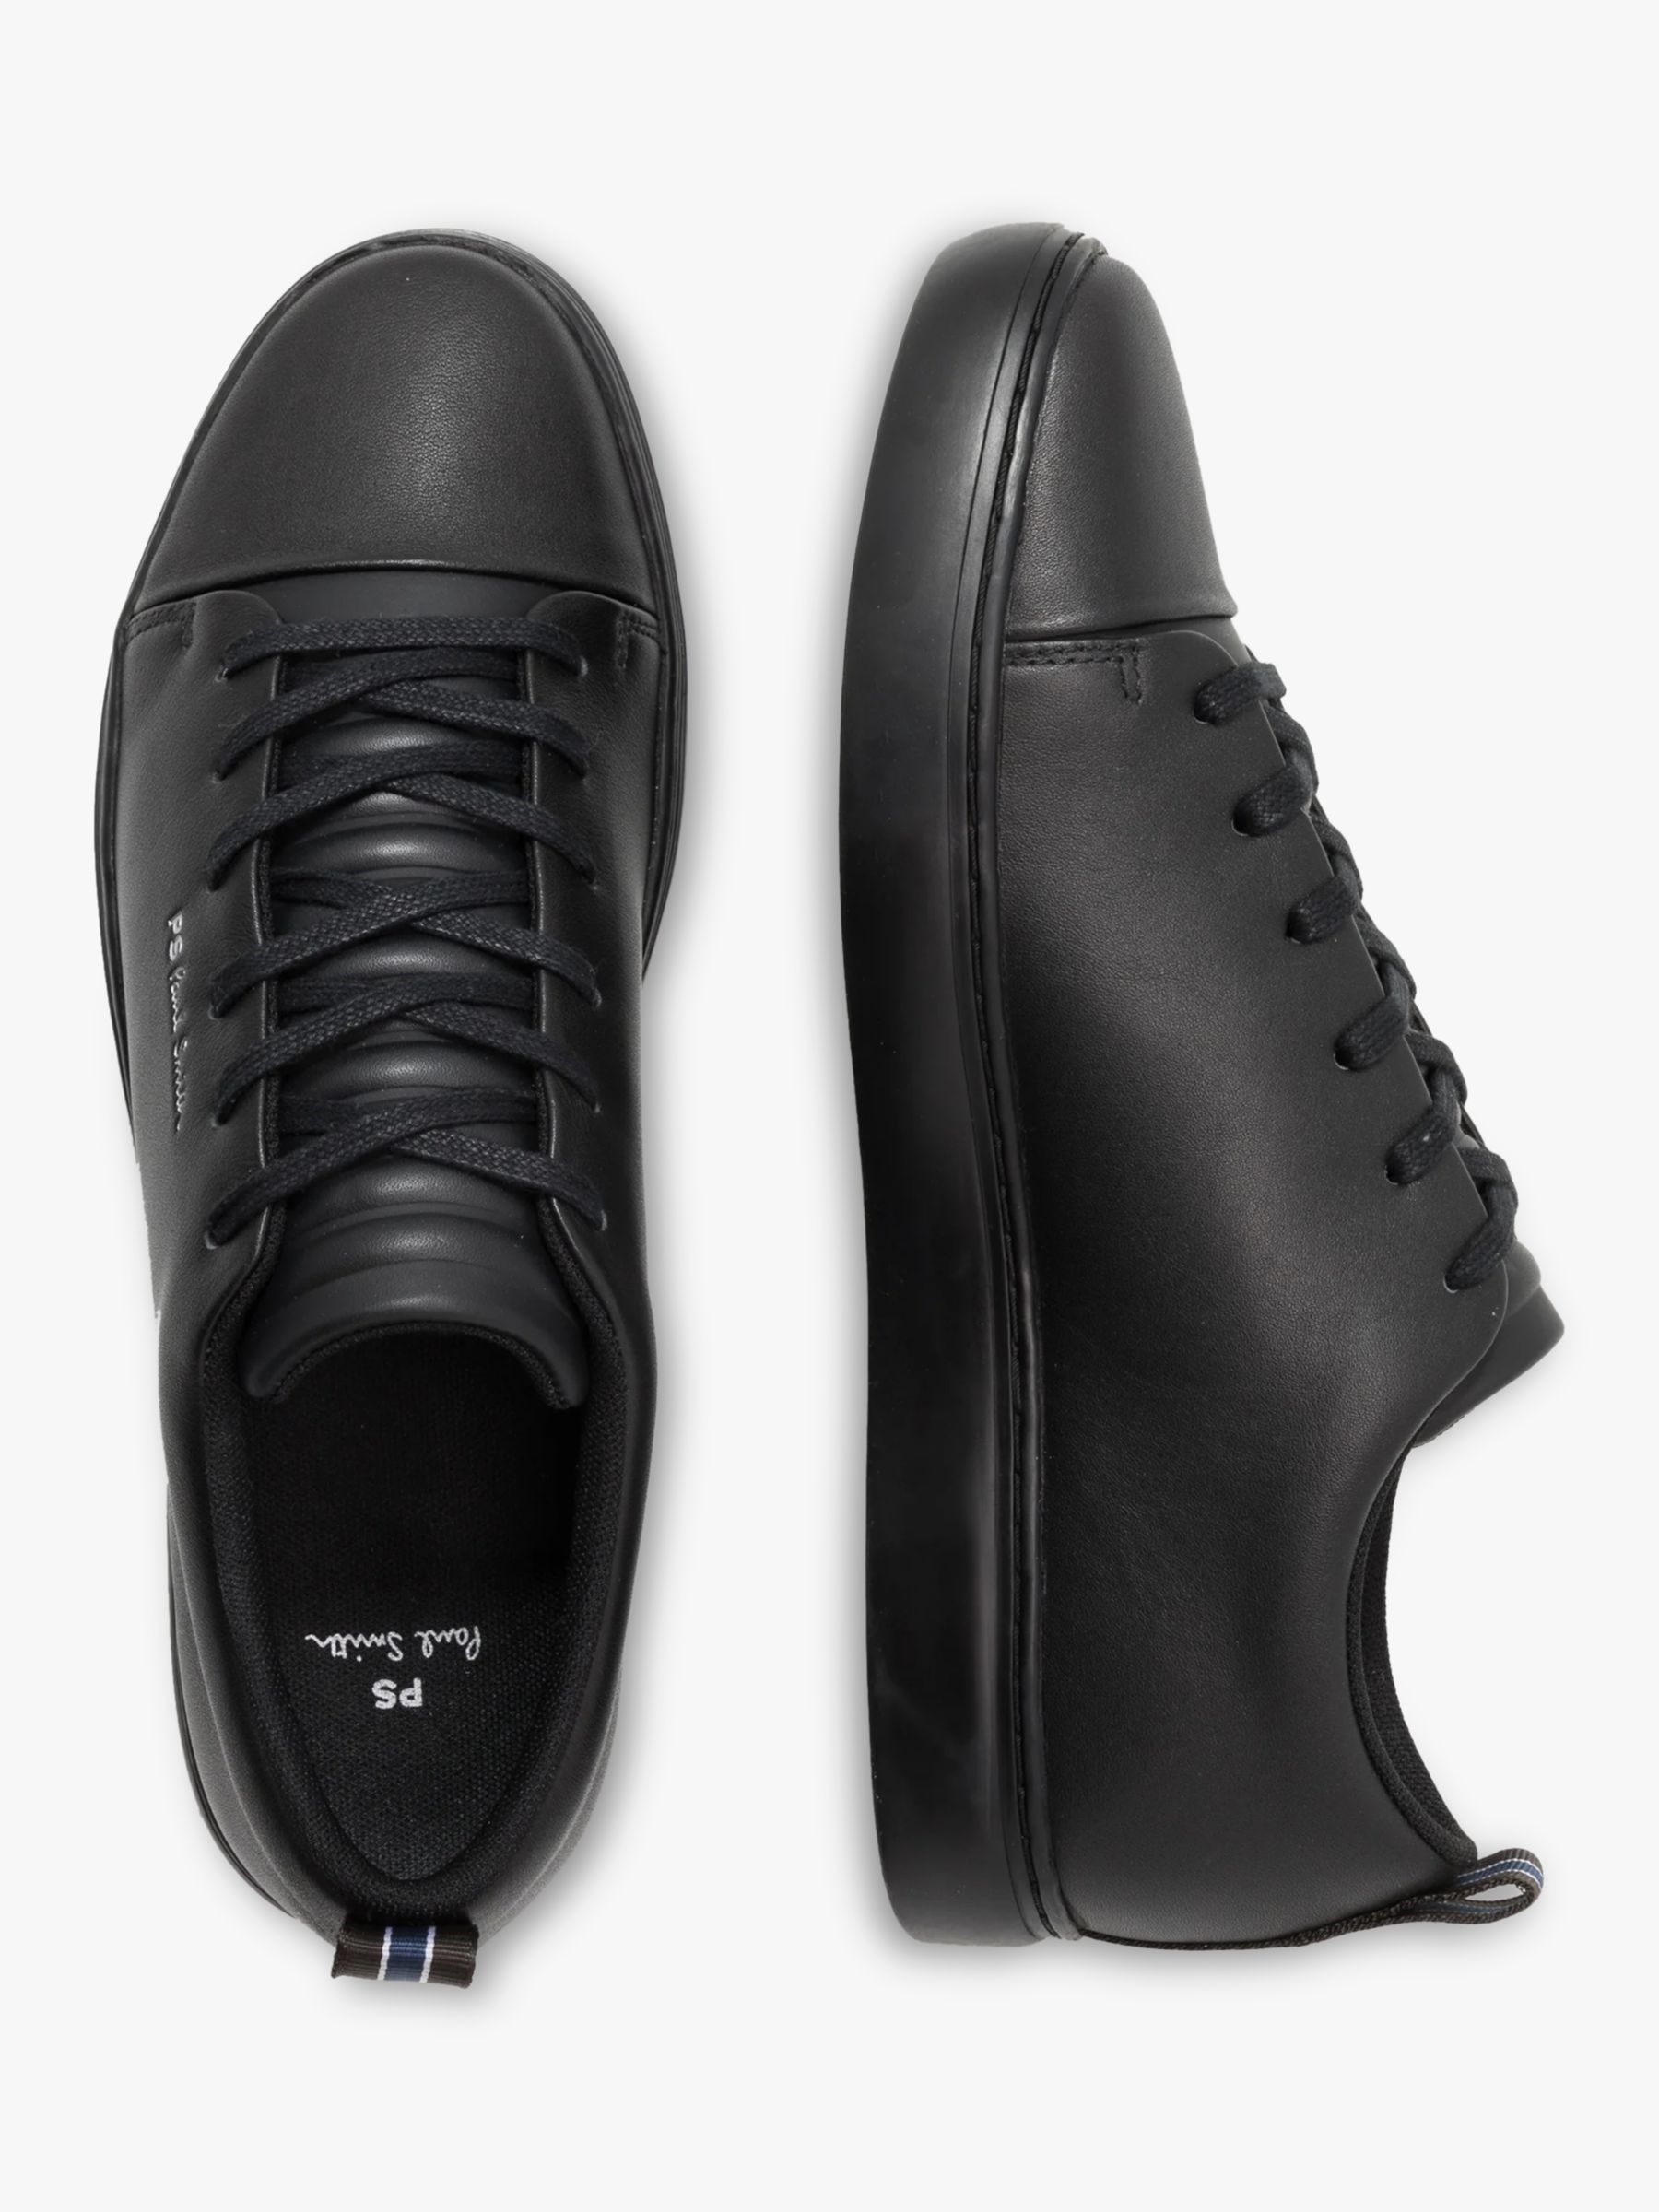 Paul Smith Lee Cupsole Trainers, Black at John Lewis & Partners